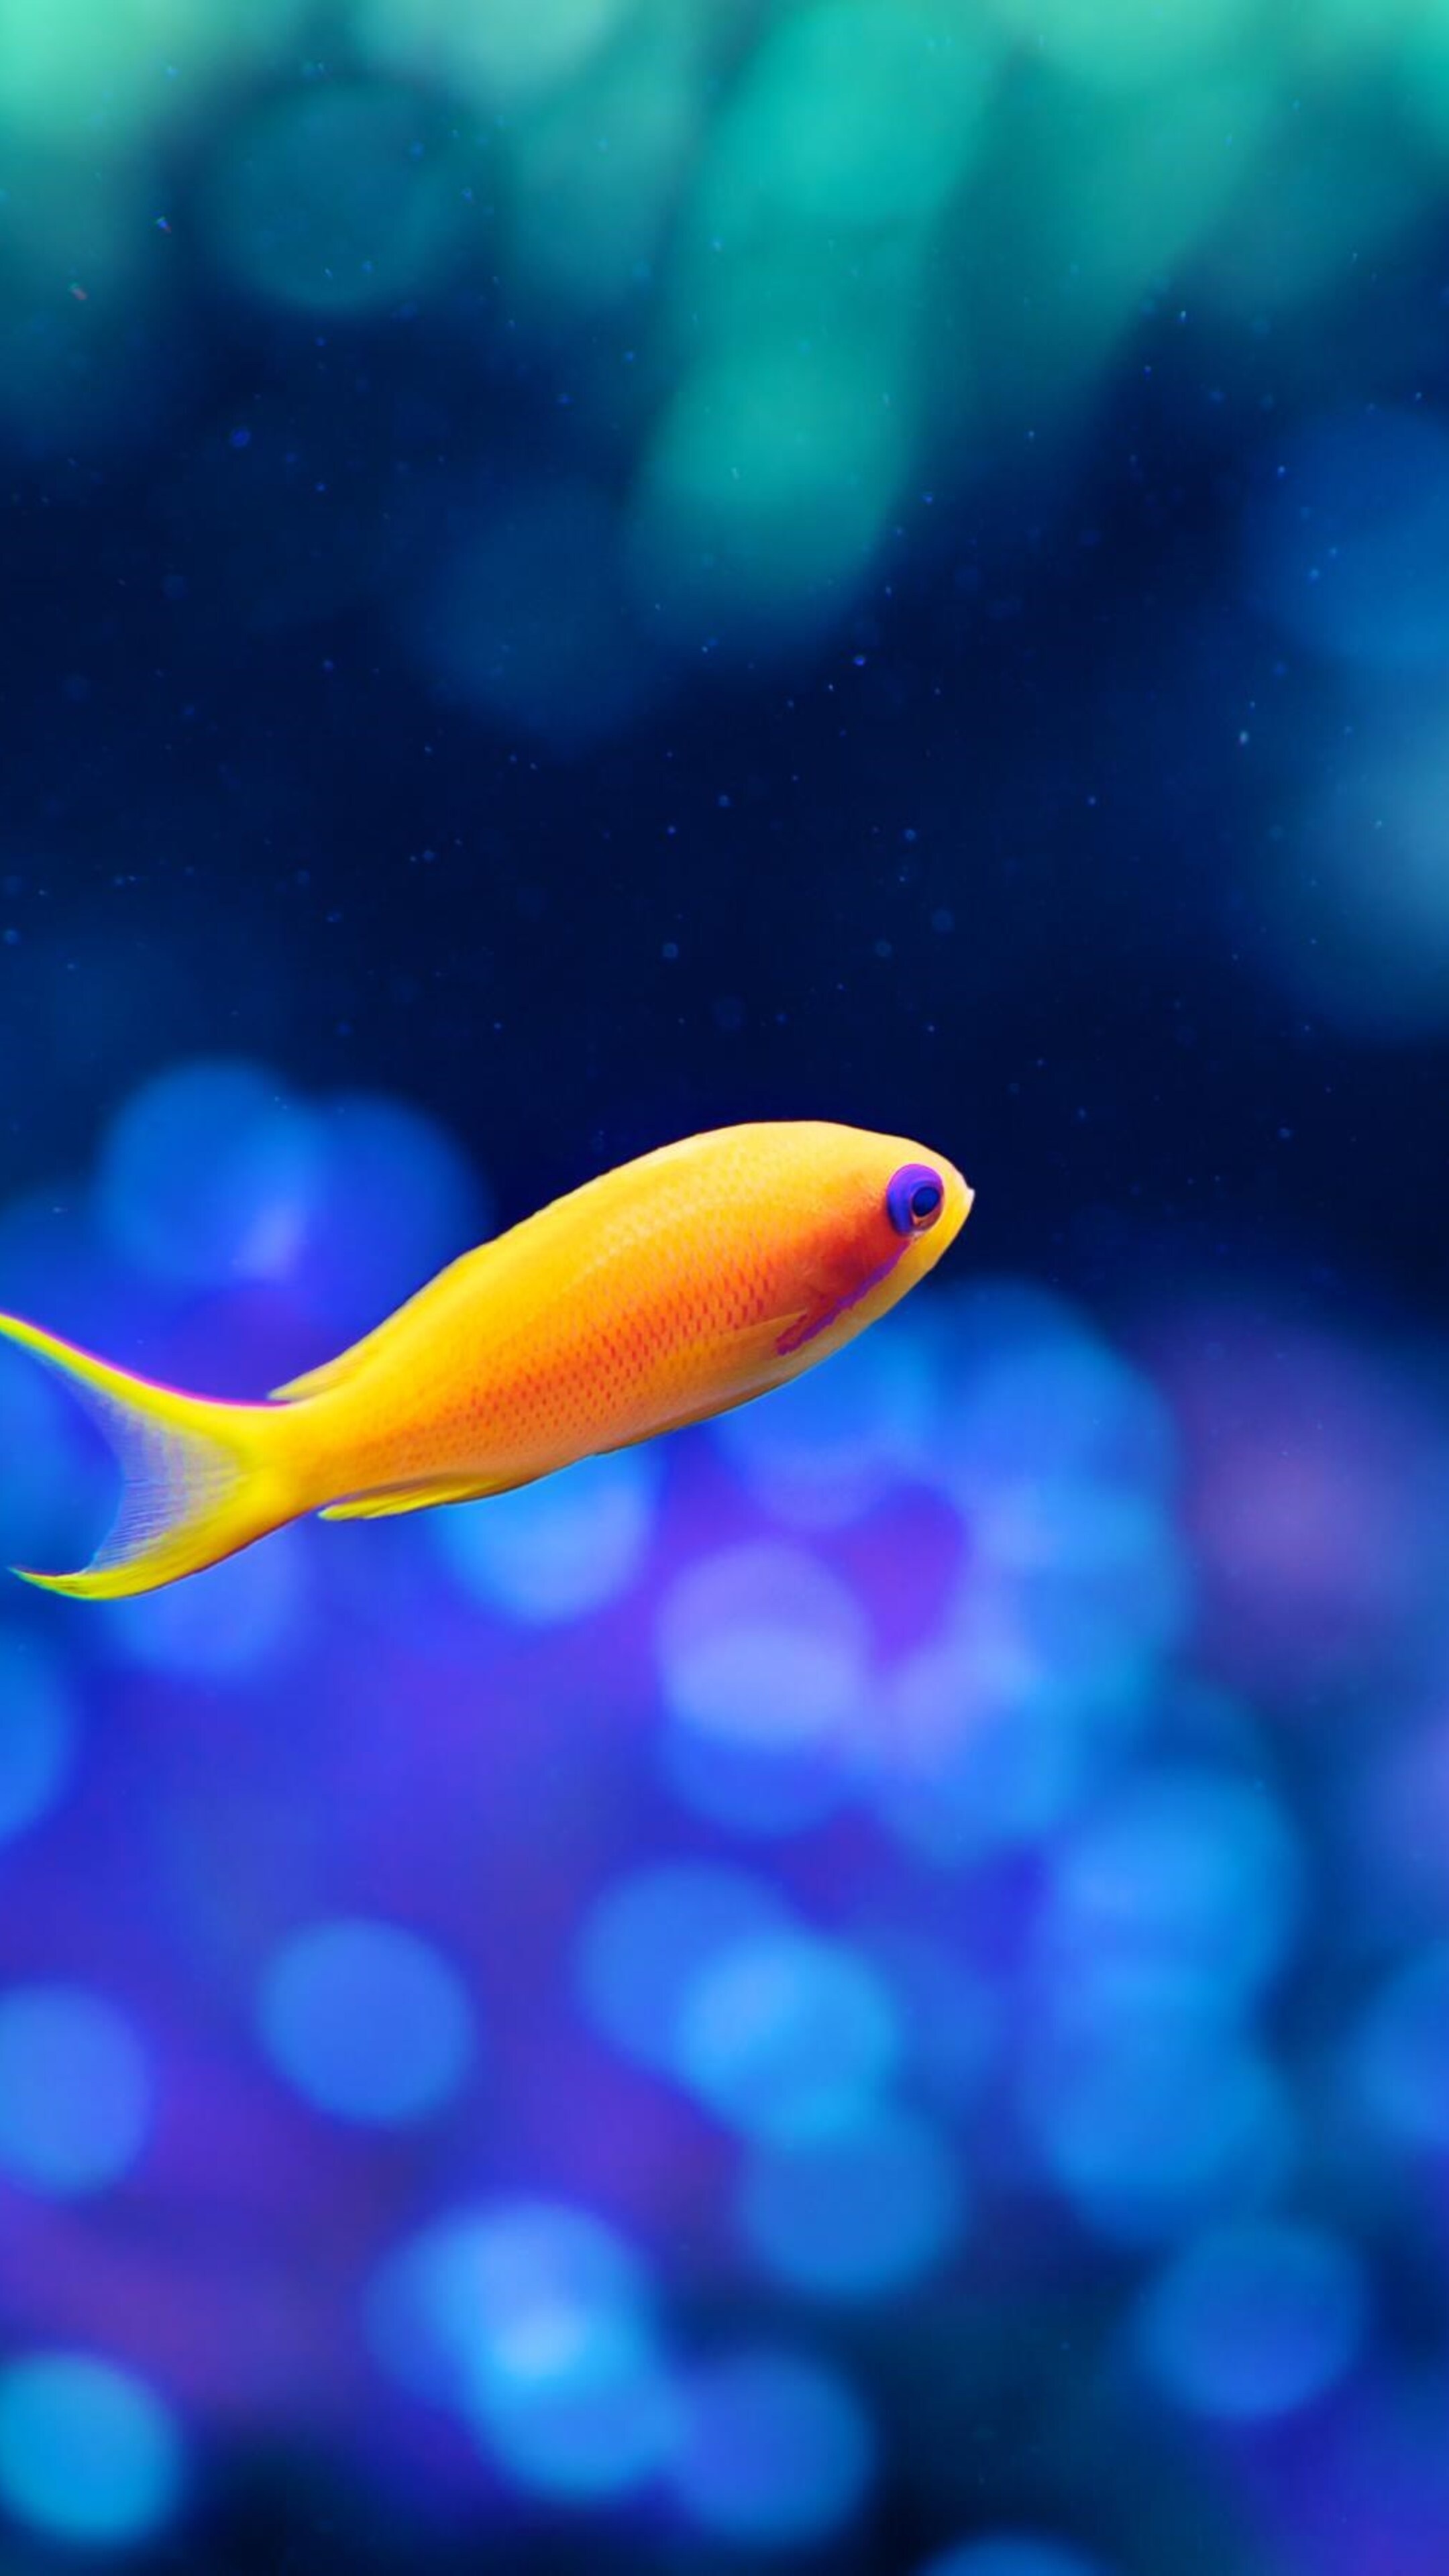 Little fancy fish Sony Xperia wallpapers, Vibrant and vibrant, Colorful aquatic life, Stunning underwater photography, 2160x3840 4K Phone